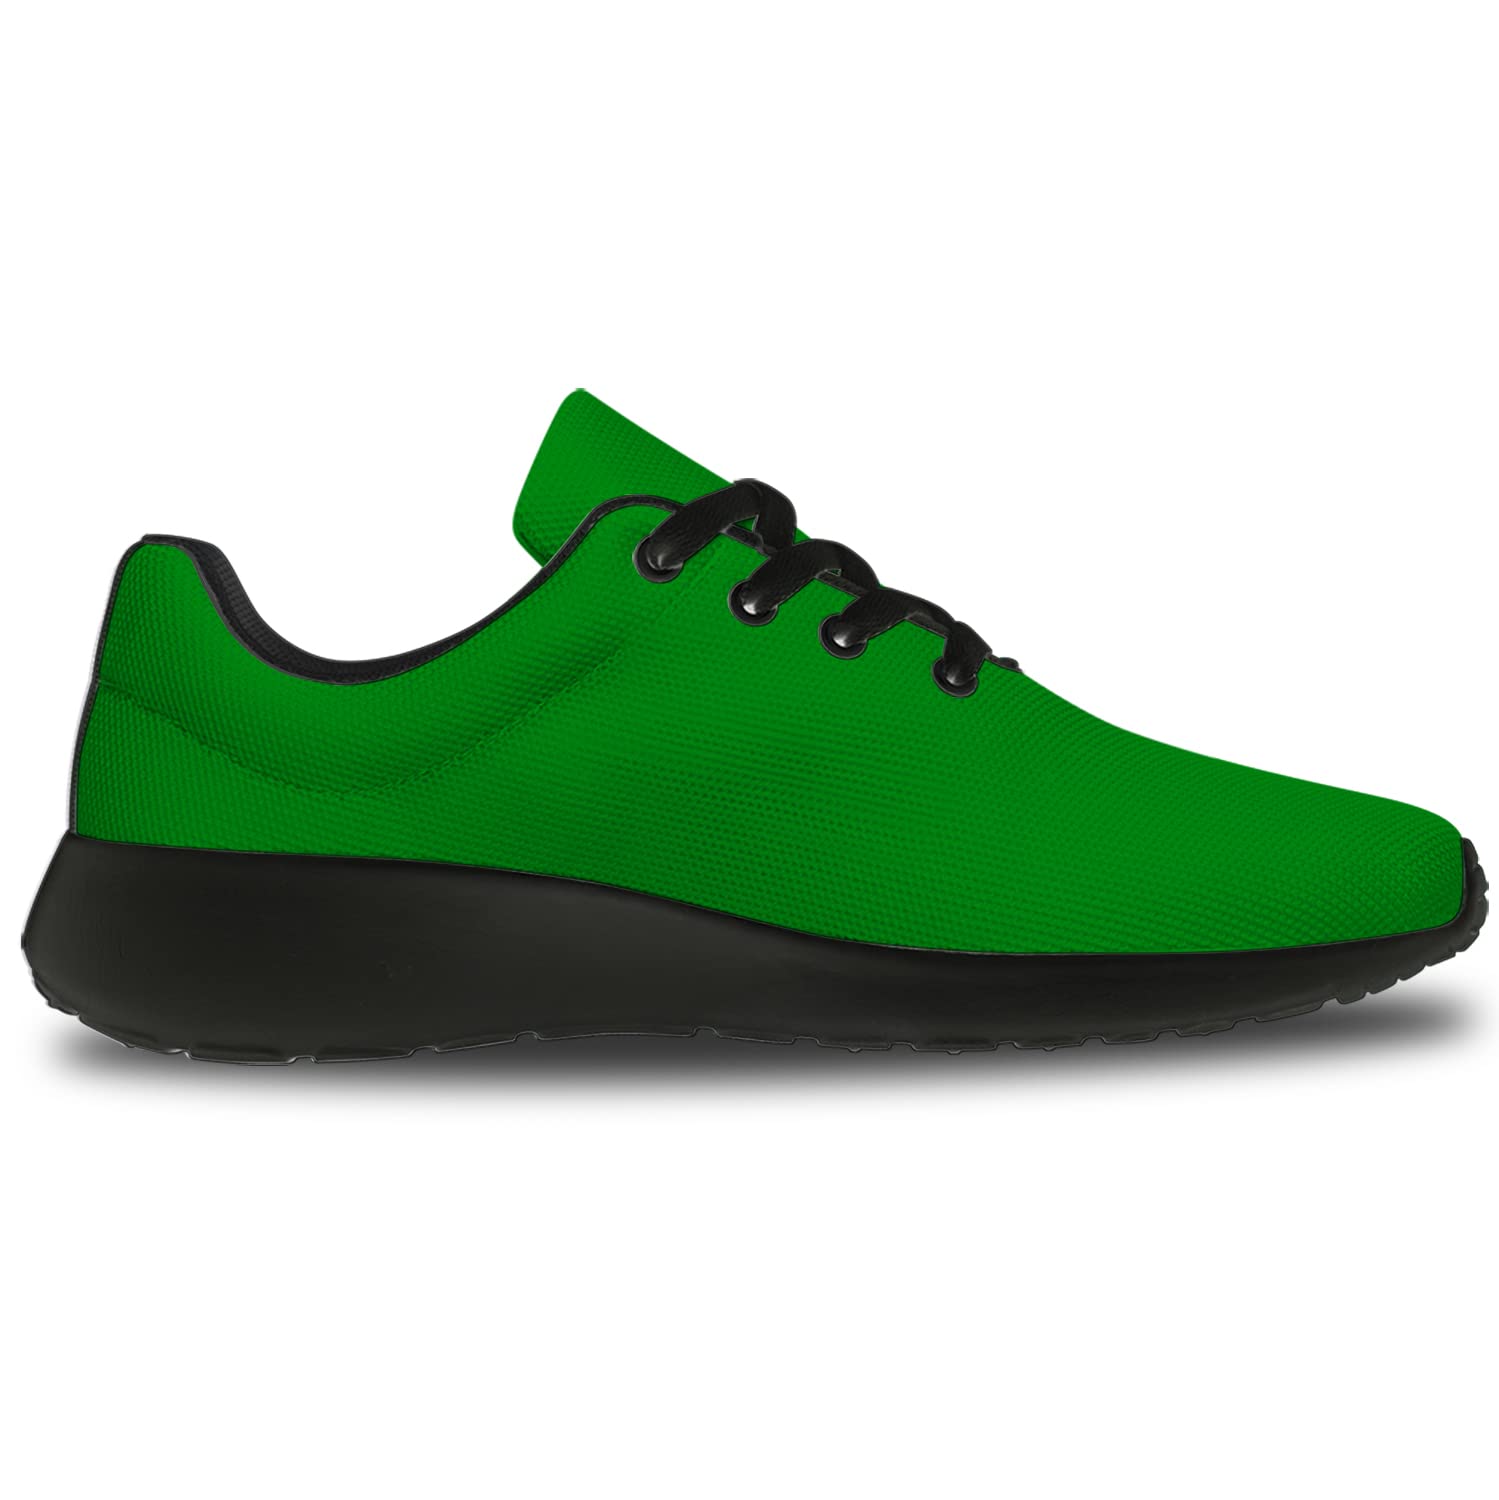 Mens Womens Green Shoes Running Walking Tennis Sneakers Green Print Solid Color Shoes Gifts for Boy Girl,Size 13 Men/15.5 Women Black